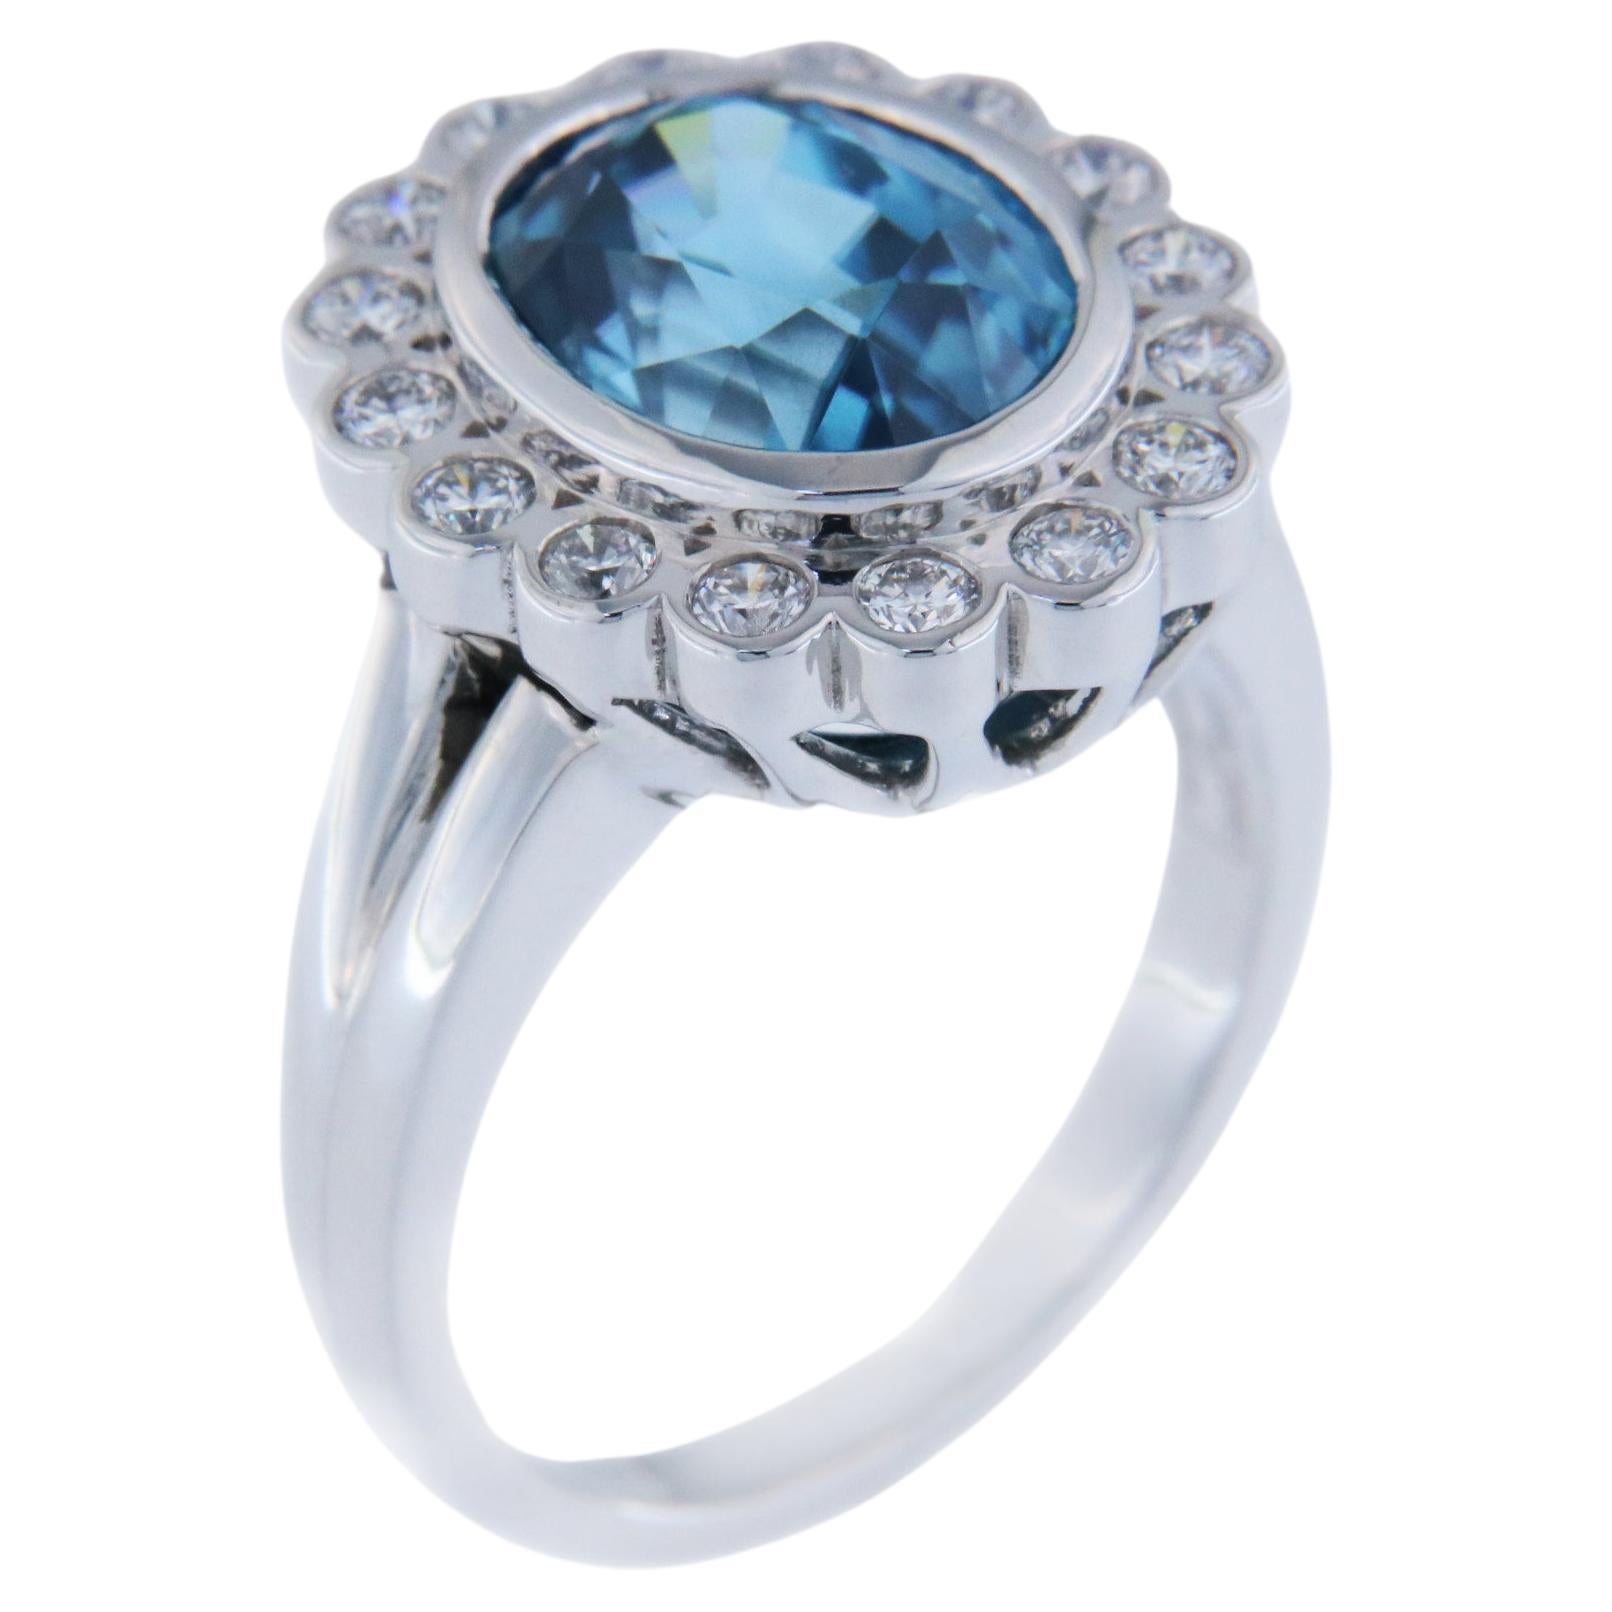 Orloff of Denmark, 6 ct Natural Blue Zircon Diamond Ring in 925 Sterling Silver For Sale